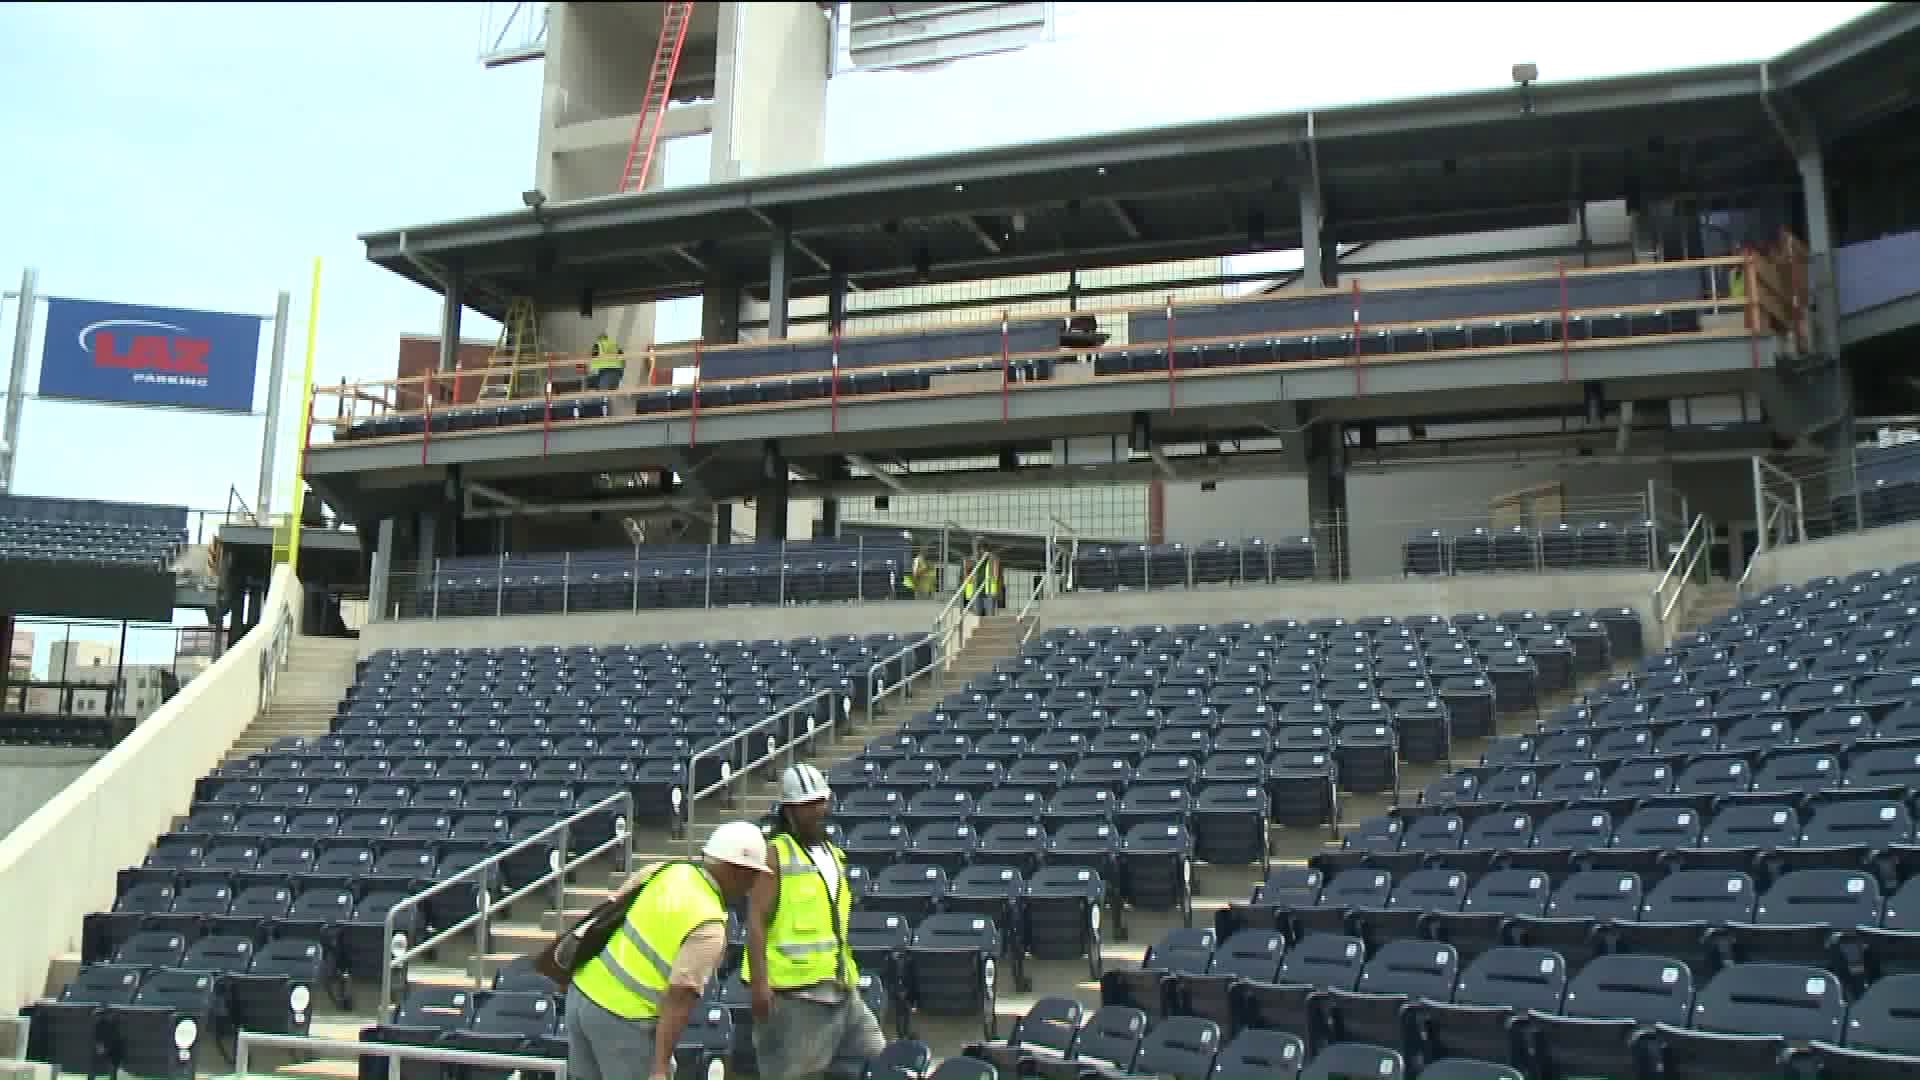 More deatails on the new Dunkin" Donuts Stadium